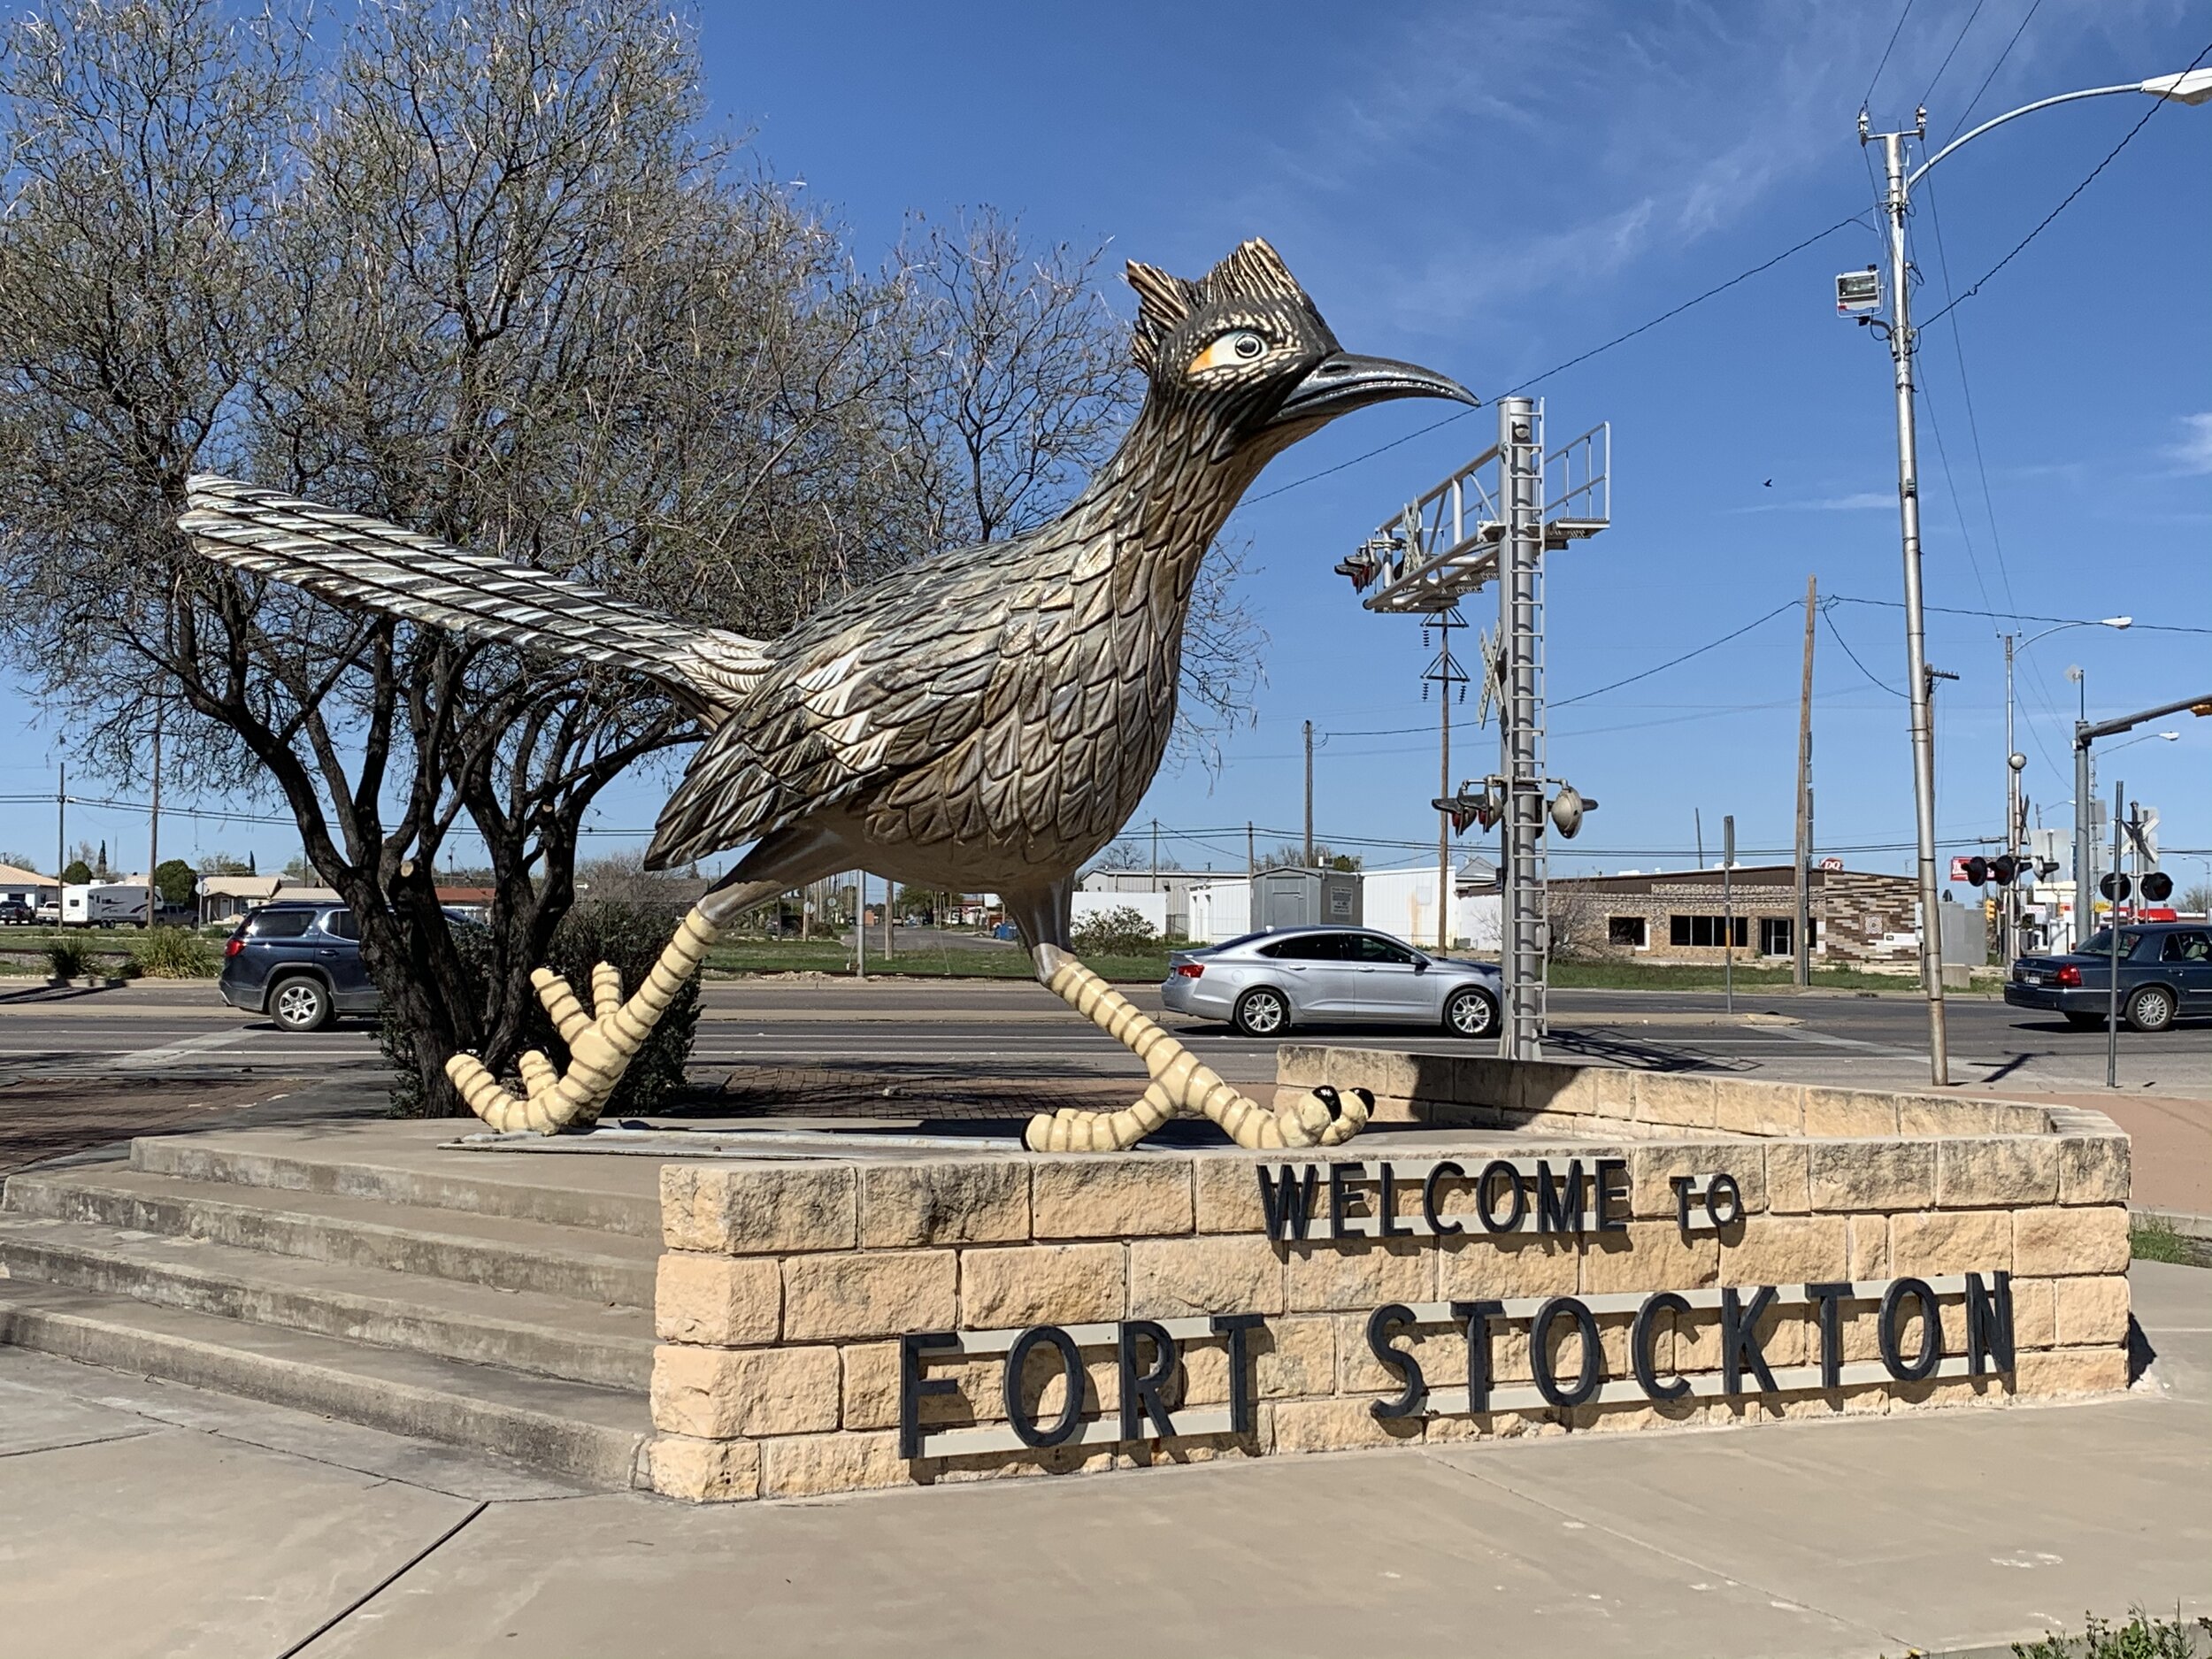  Fort Stockton is where we first were introduced to real Roadrunners. They are the cutest things—preferring to run rather than fly. Its always fun to see them. They can run up to 20 miles an hour.  